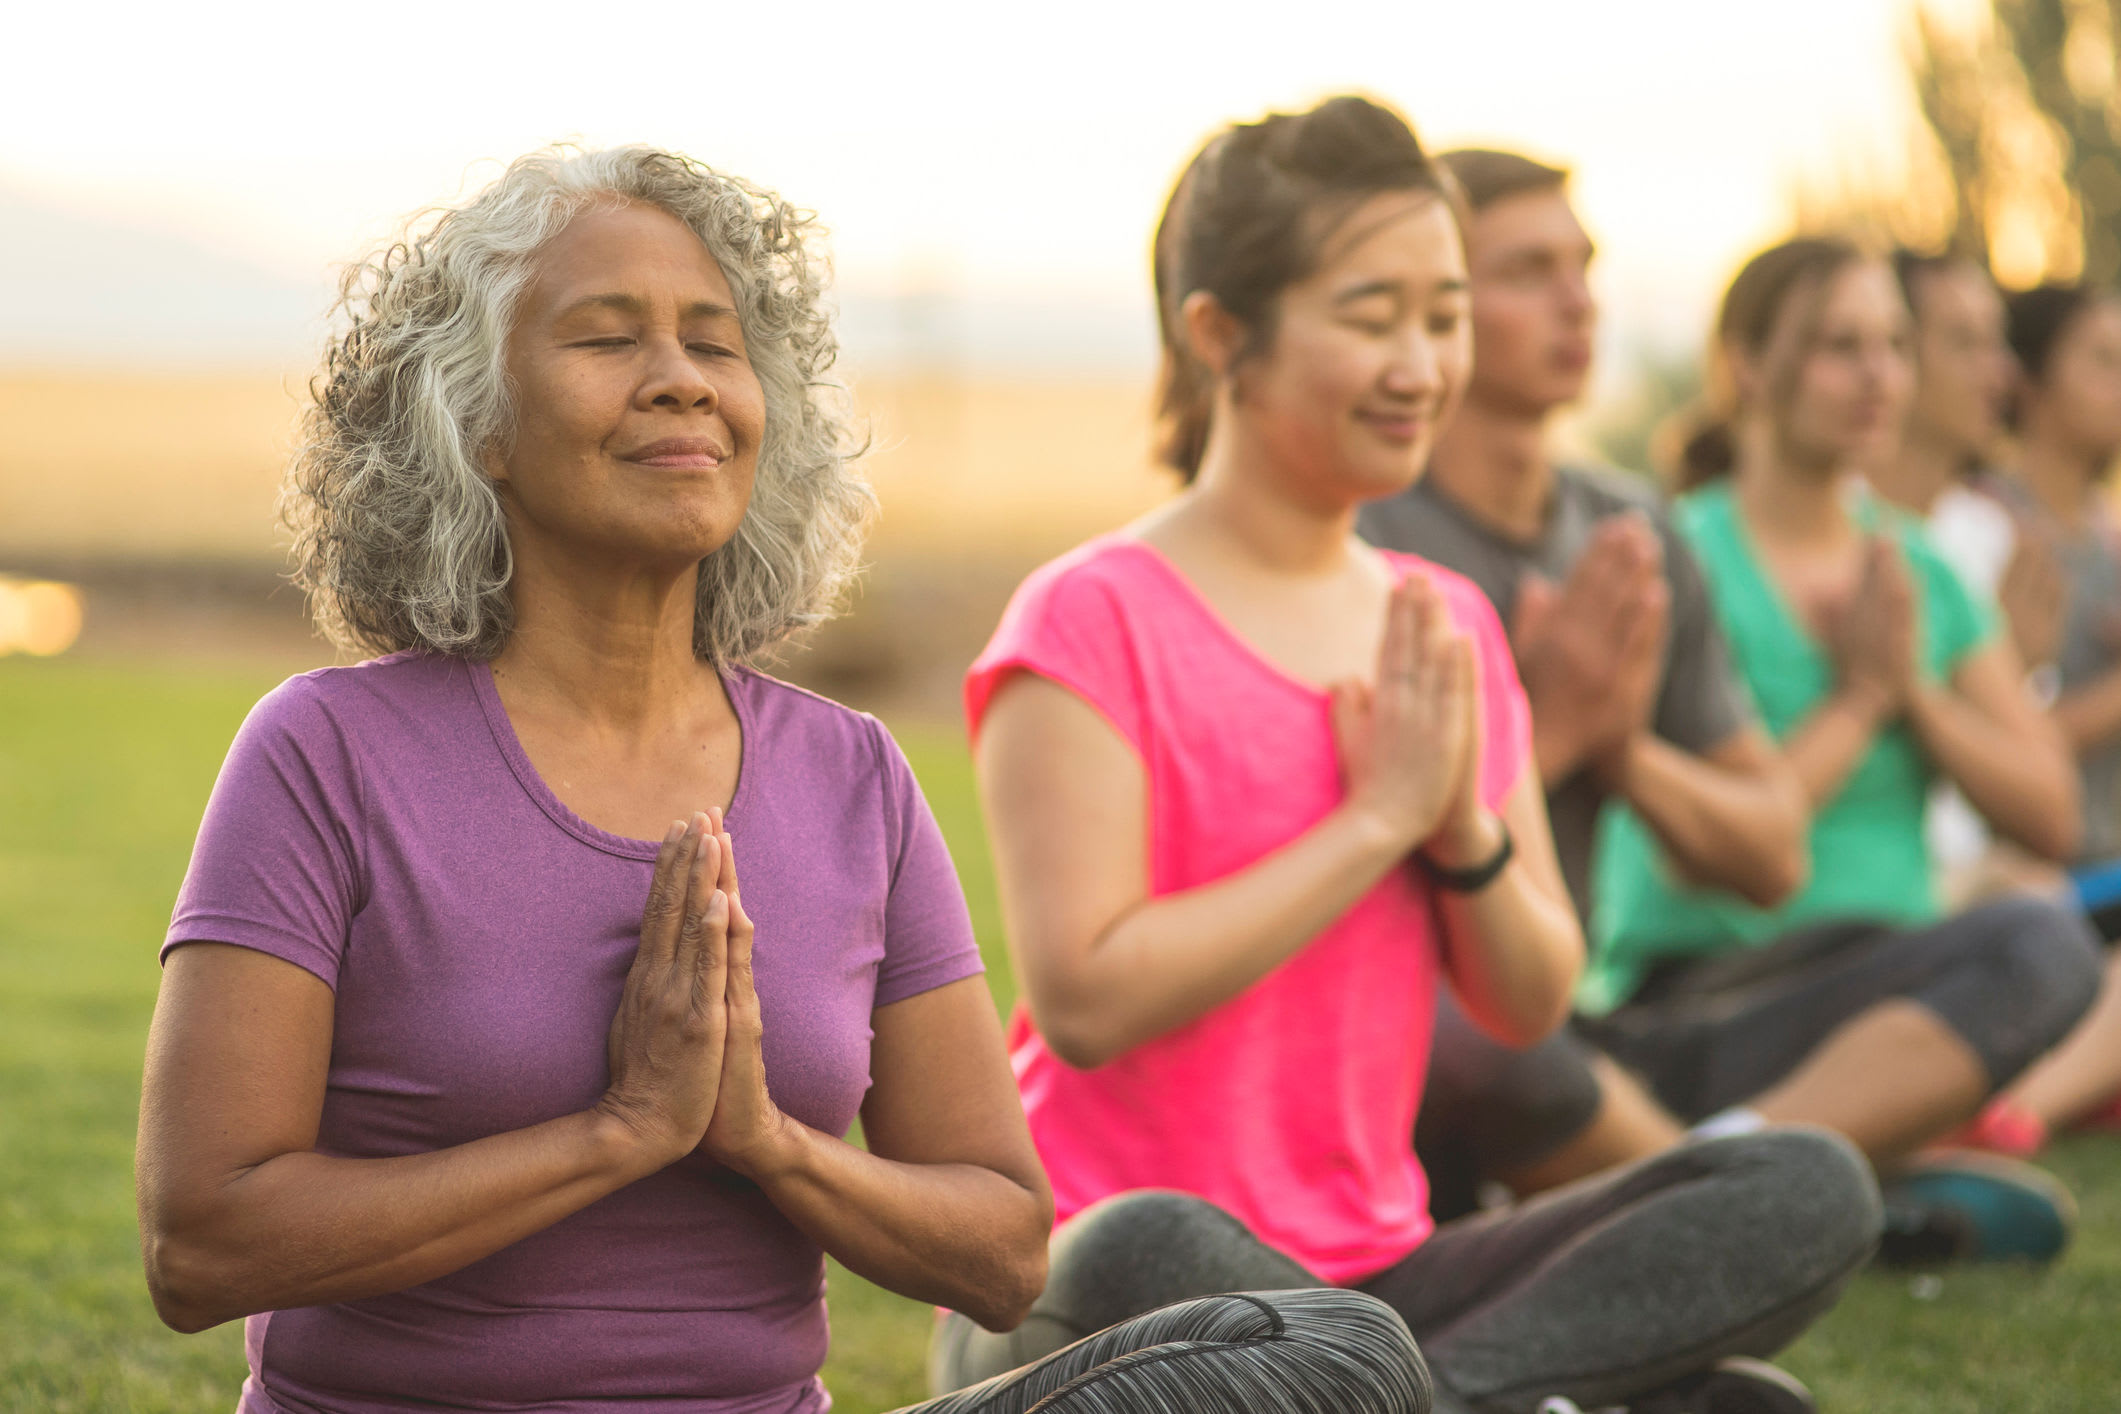 Close up of people making namaste gesture at yoga class outdoors at Ziegler Place in Livonia, Michigan